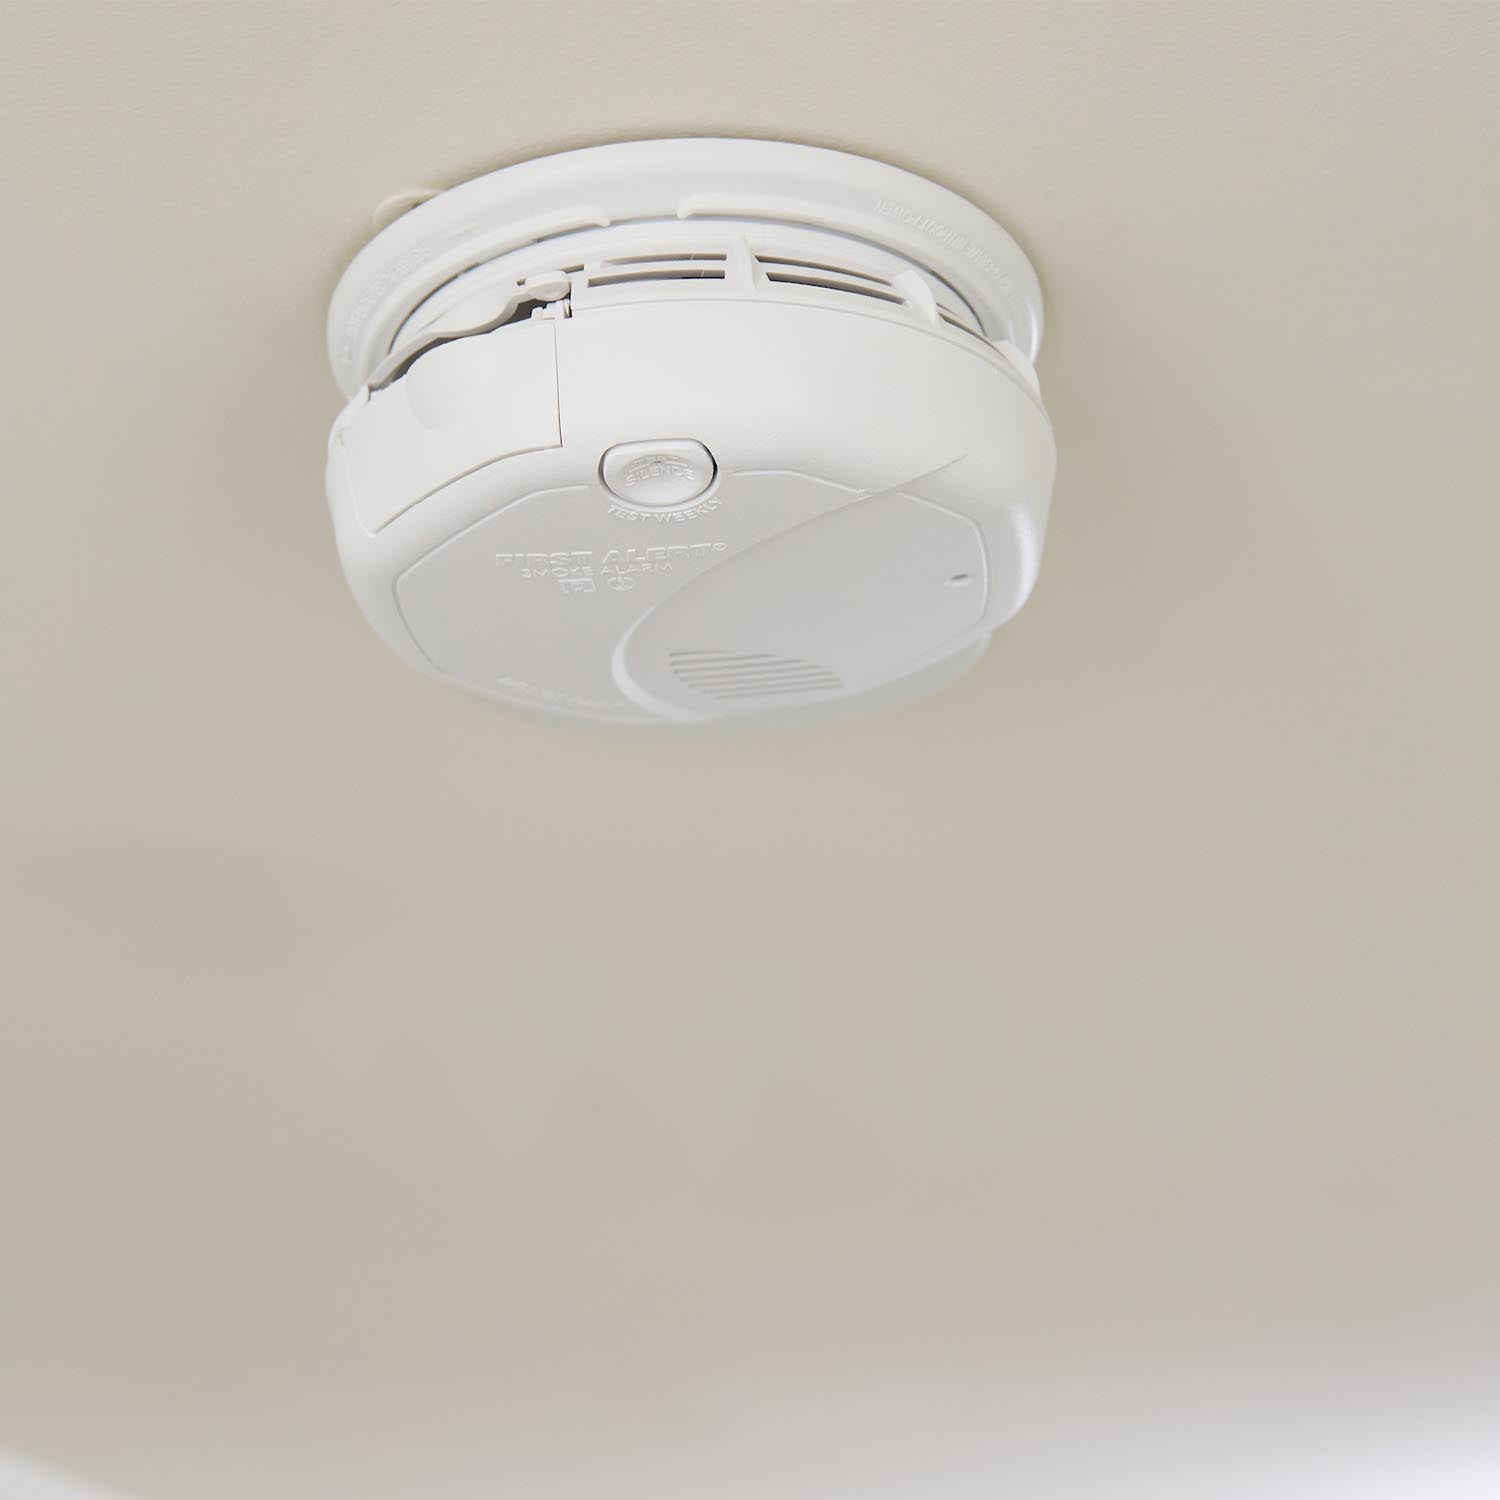 White Smoke Detector Battery Operated W/ Ionization/Photoelectric Dual Sensors